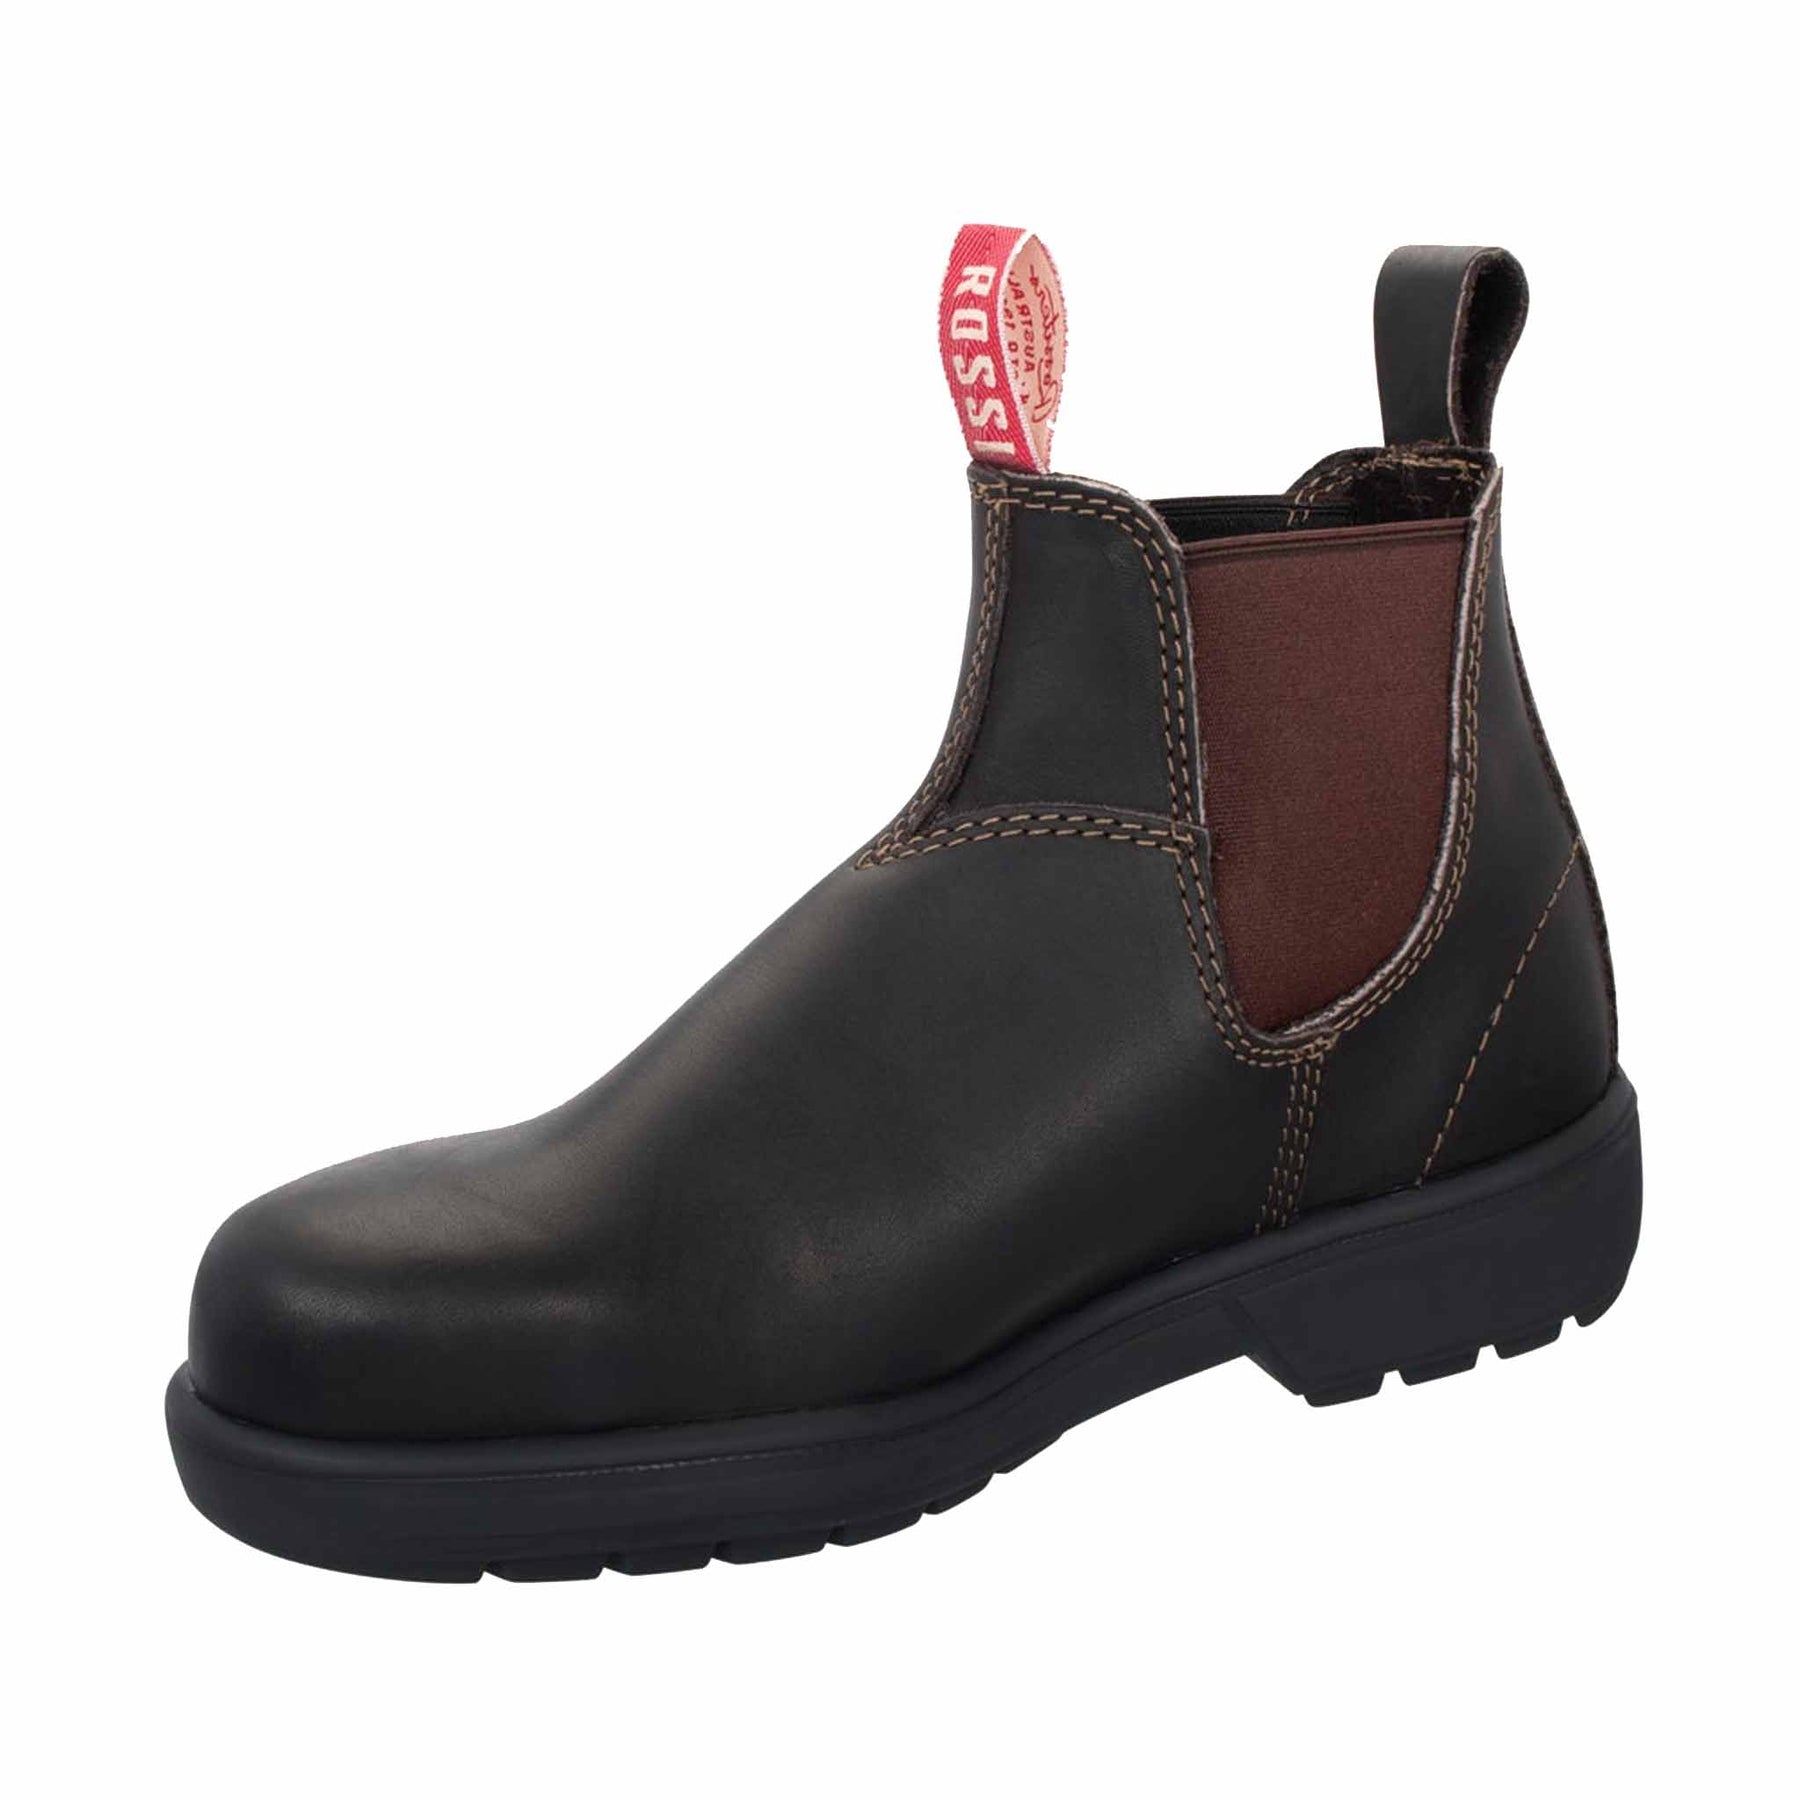 trojan safety pull on boot in brown